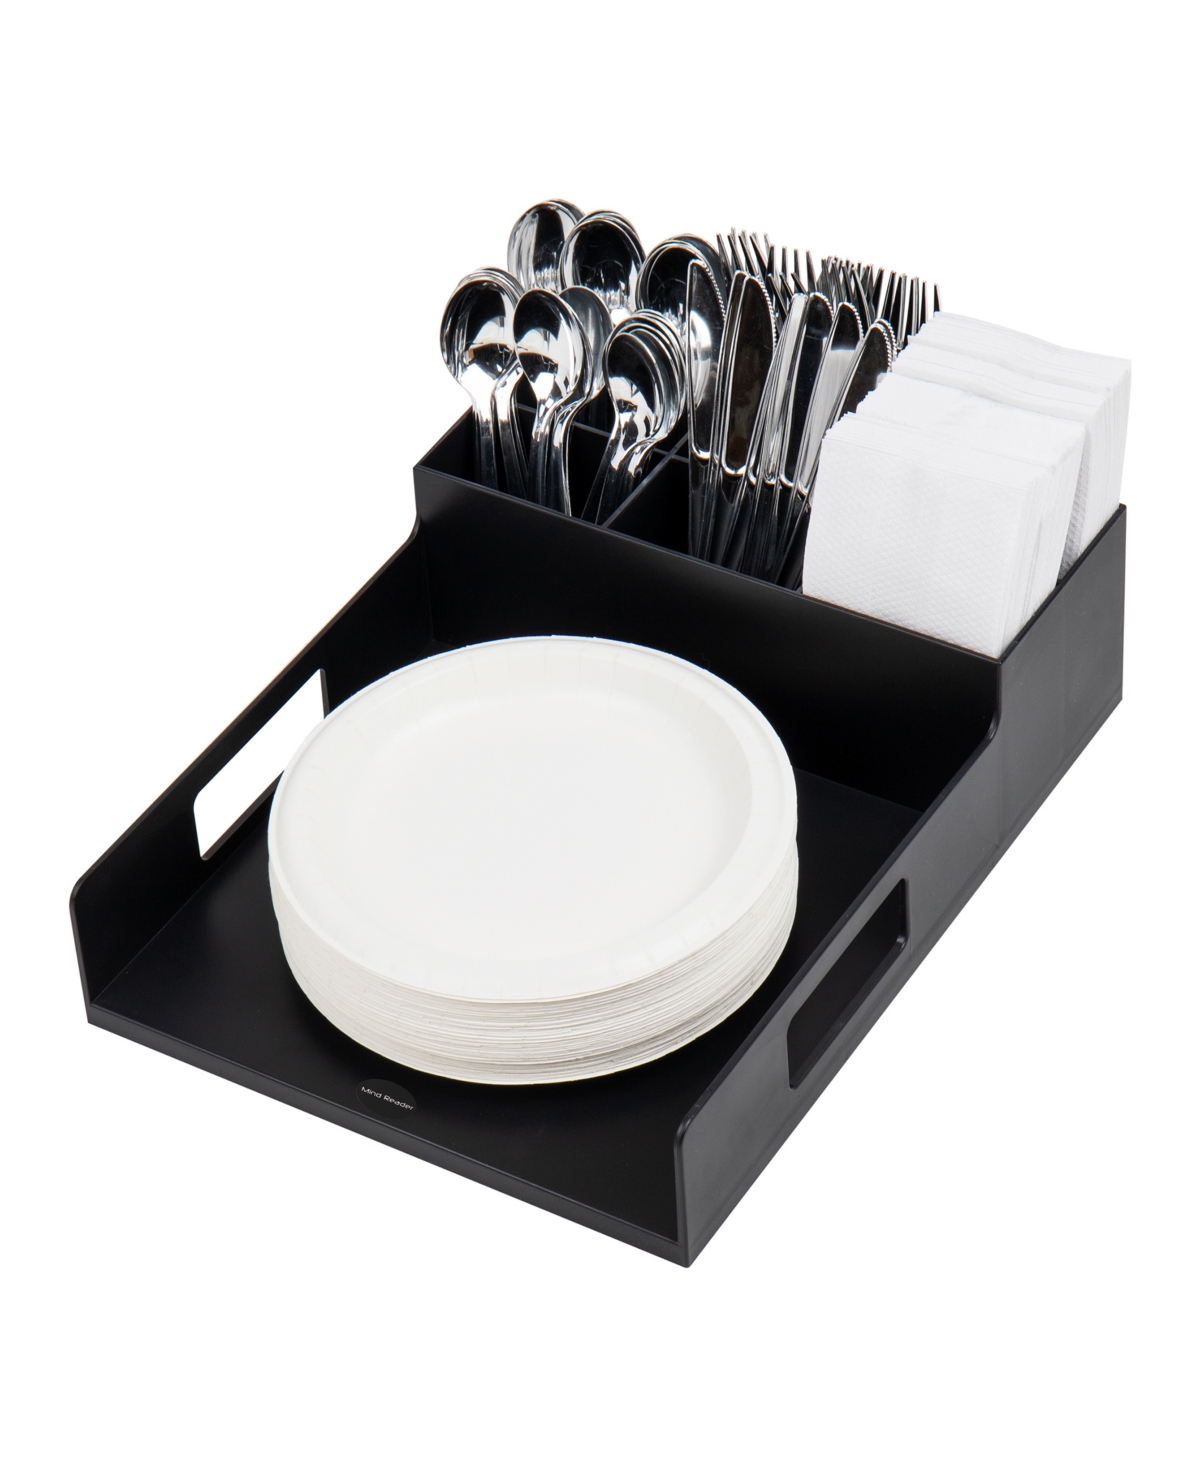 Shop Mind Reader Anchor Collection, Utensil, Napkin And Plate Serving Tray, Break Room, Countertop Organizer In Black